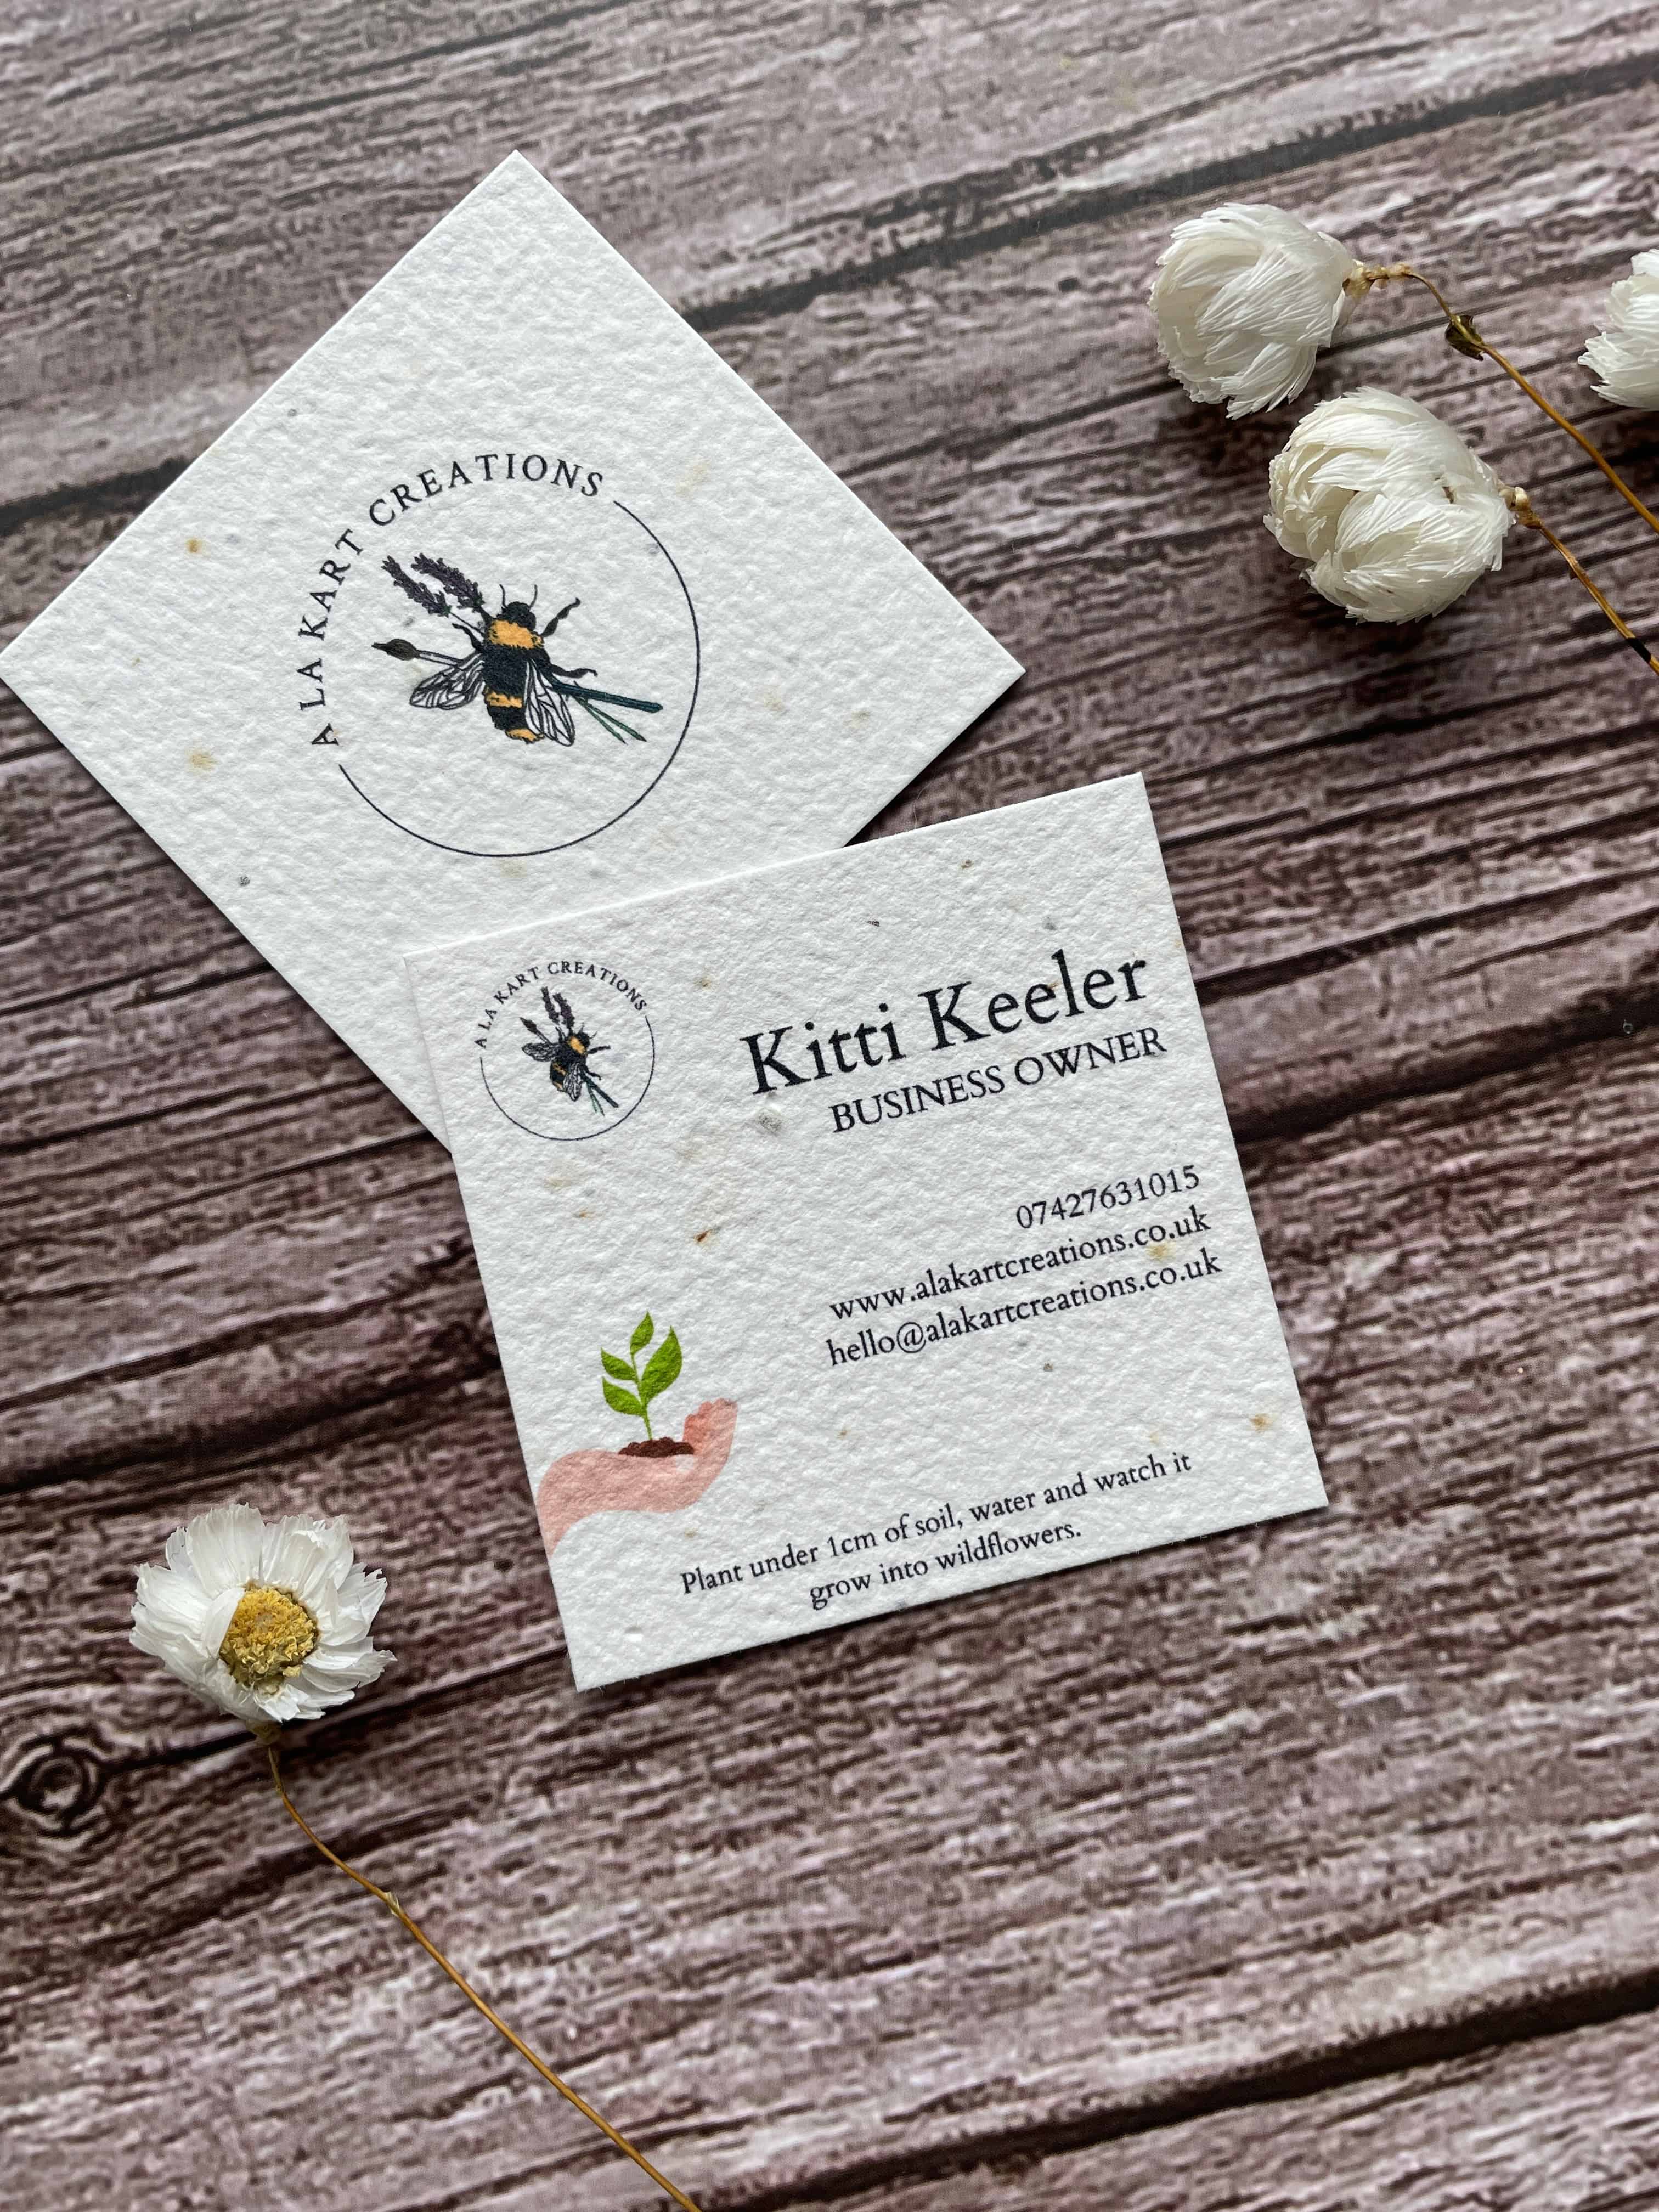 Plantable Square Seed Paper Business Card from an angle